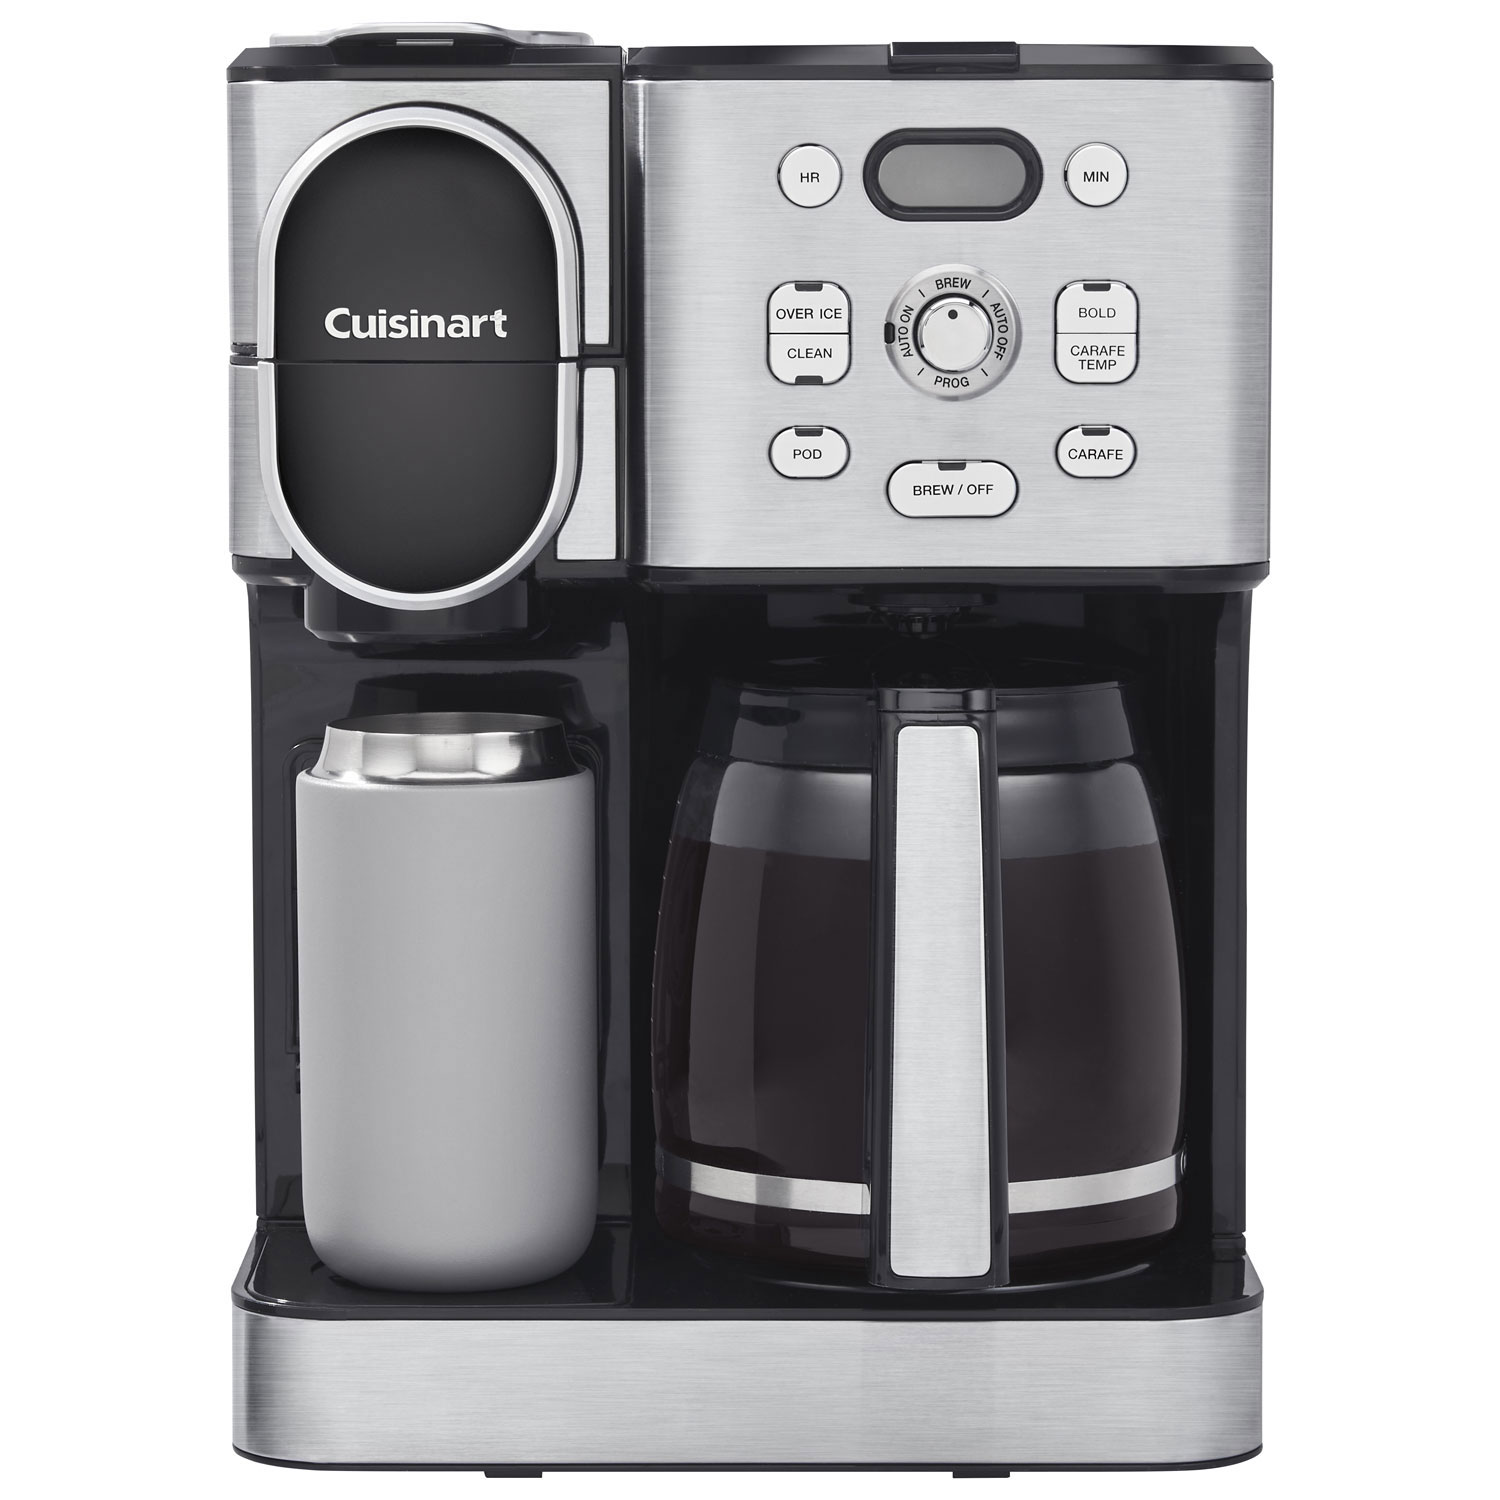 Cuisinart Automatic Drip Coffee Maker - 12-Cup - Black/Silver